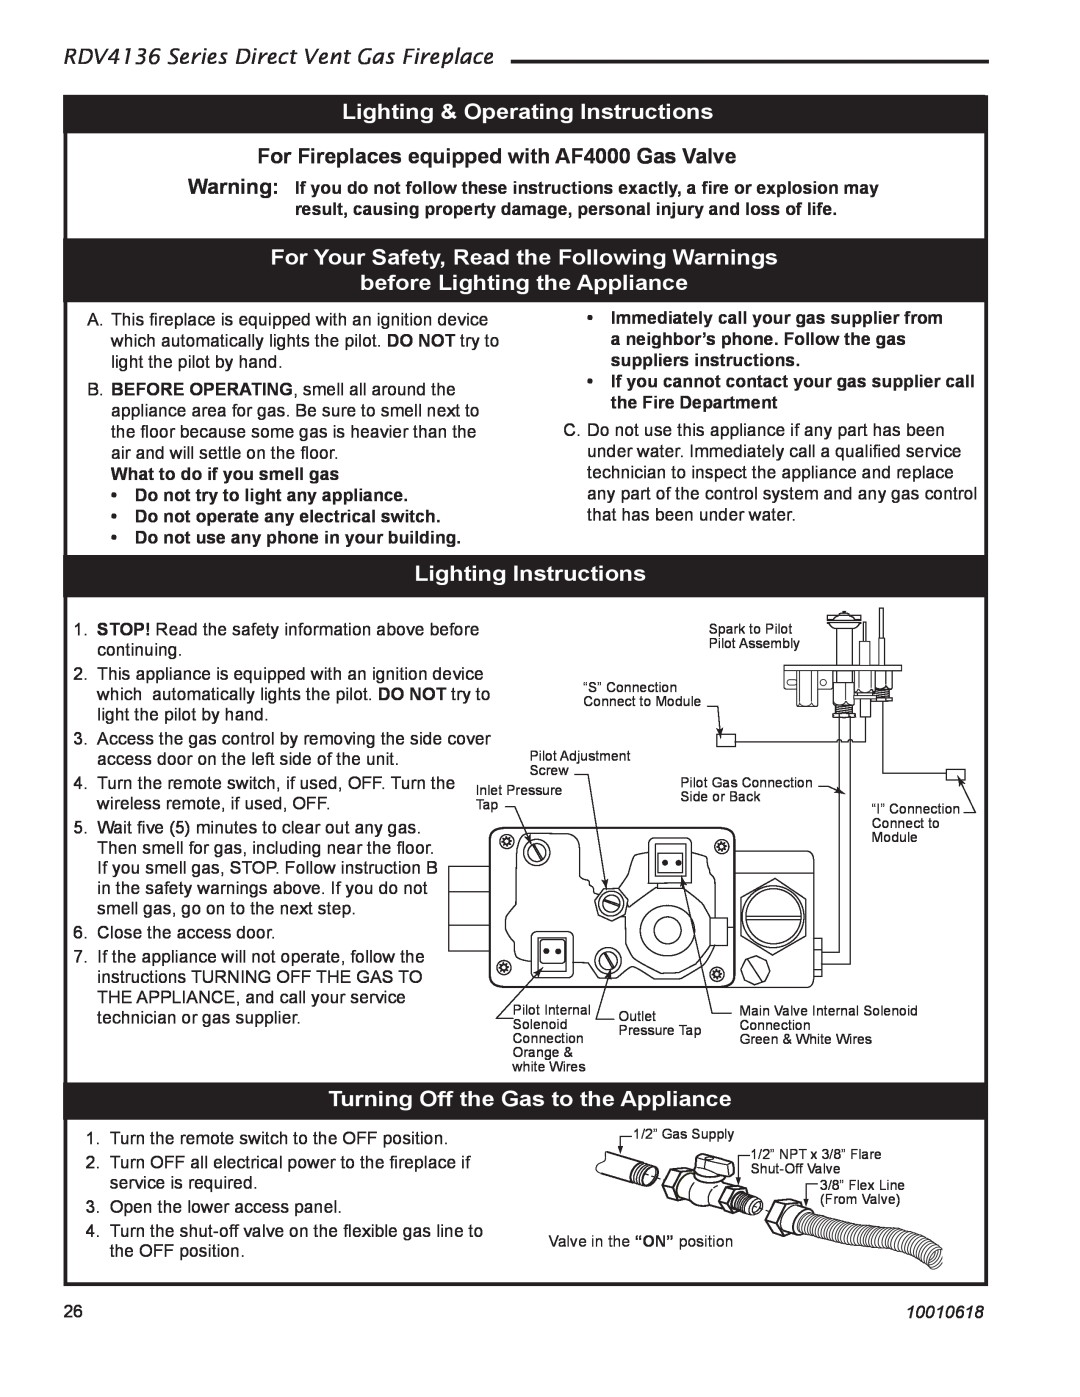 Majestic Appliances RDV4136 Lighting & Operating Instructions, For Your Safety, Read the Following Warnings, 10010618 